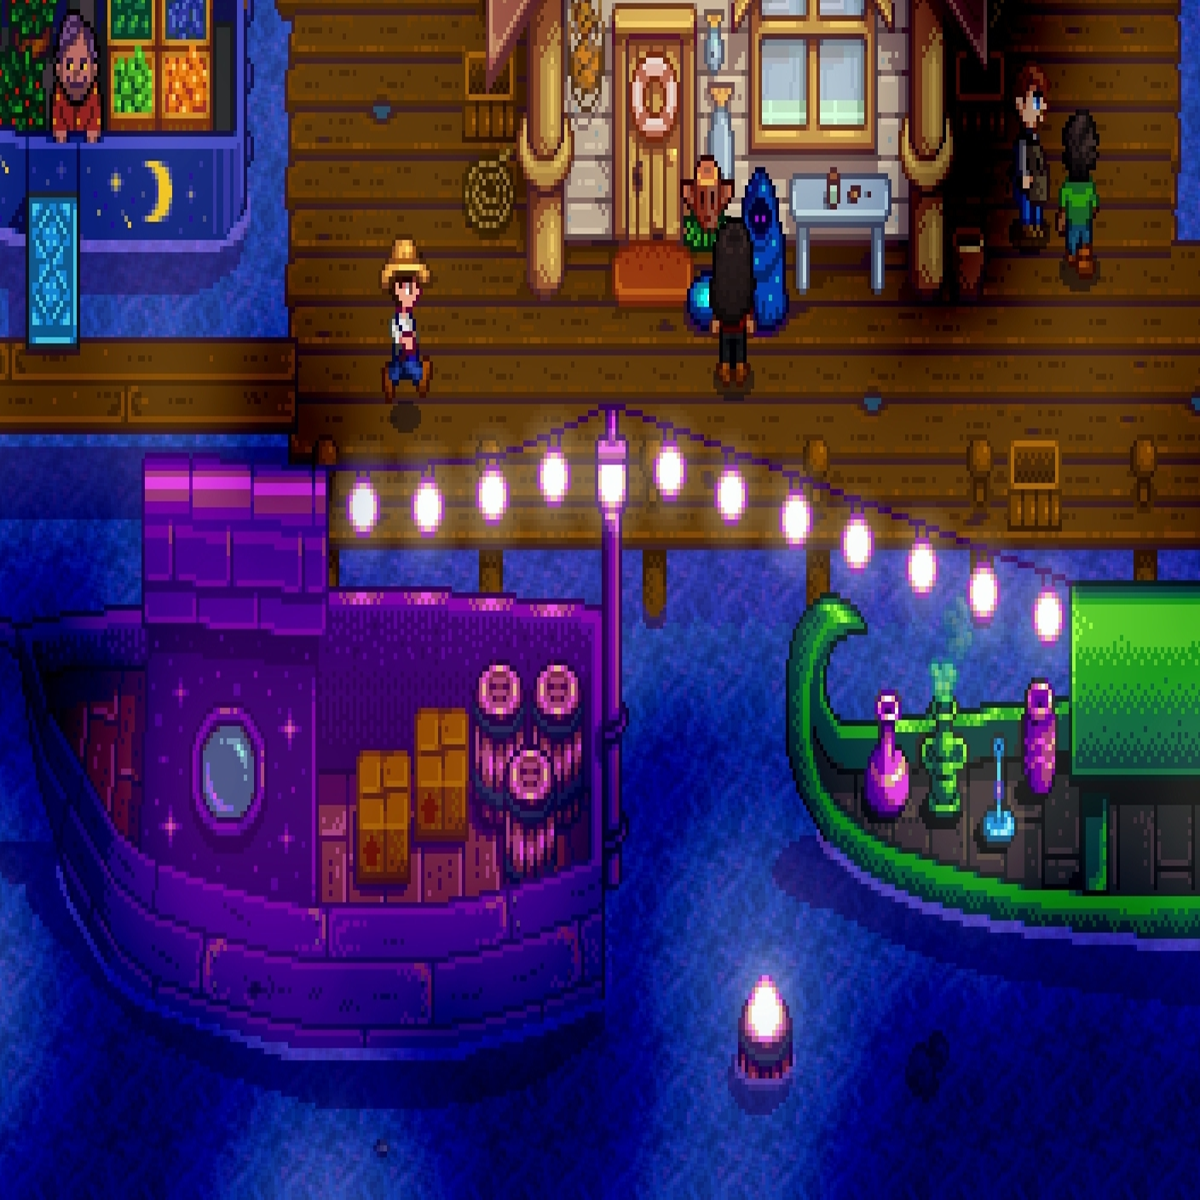 Stardew Valley 1.6 Update to Introduce Multiplayer and Festivals